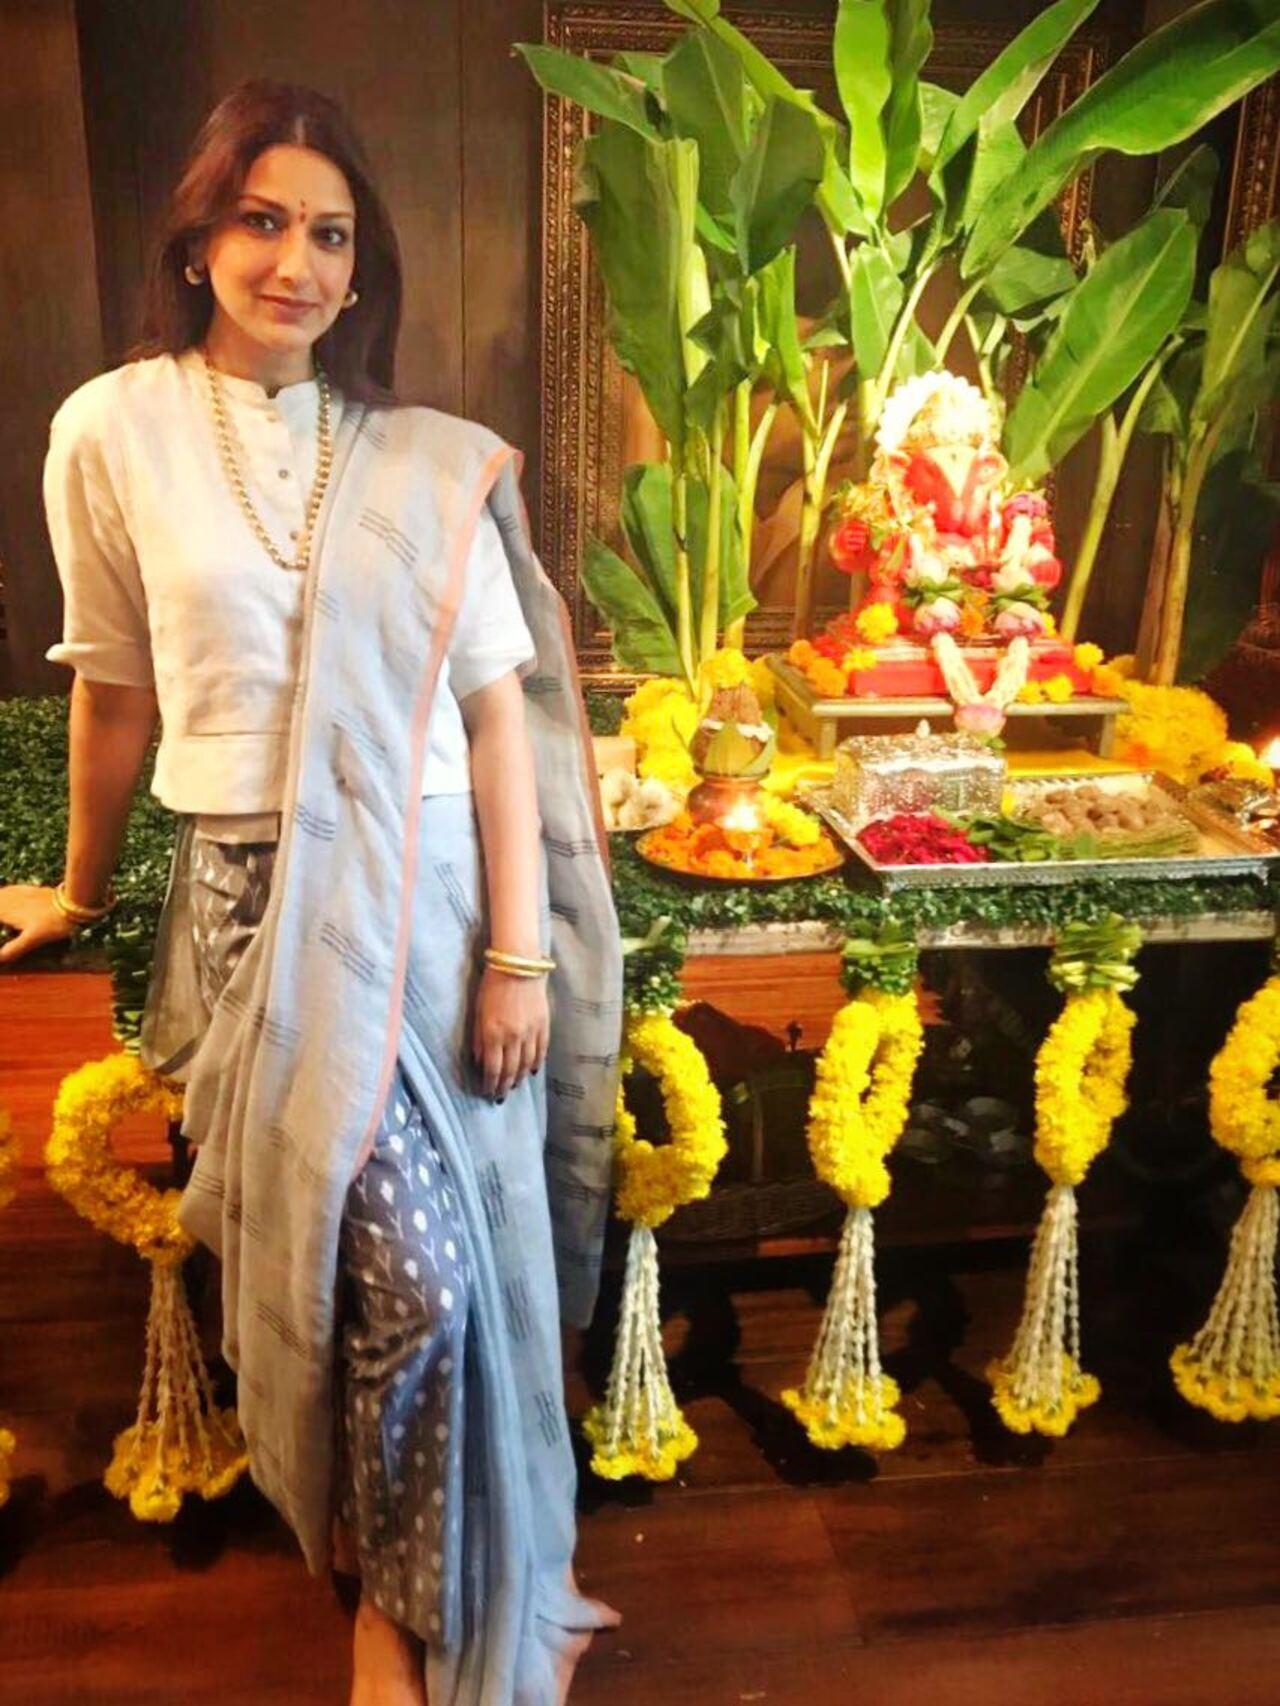 Being a Maharashtrian, Sonali Bendre's Ganesh Chaturthi celebration is a beautiful blend of tradition and simplicity